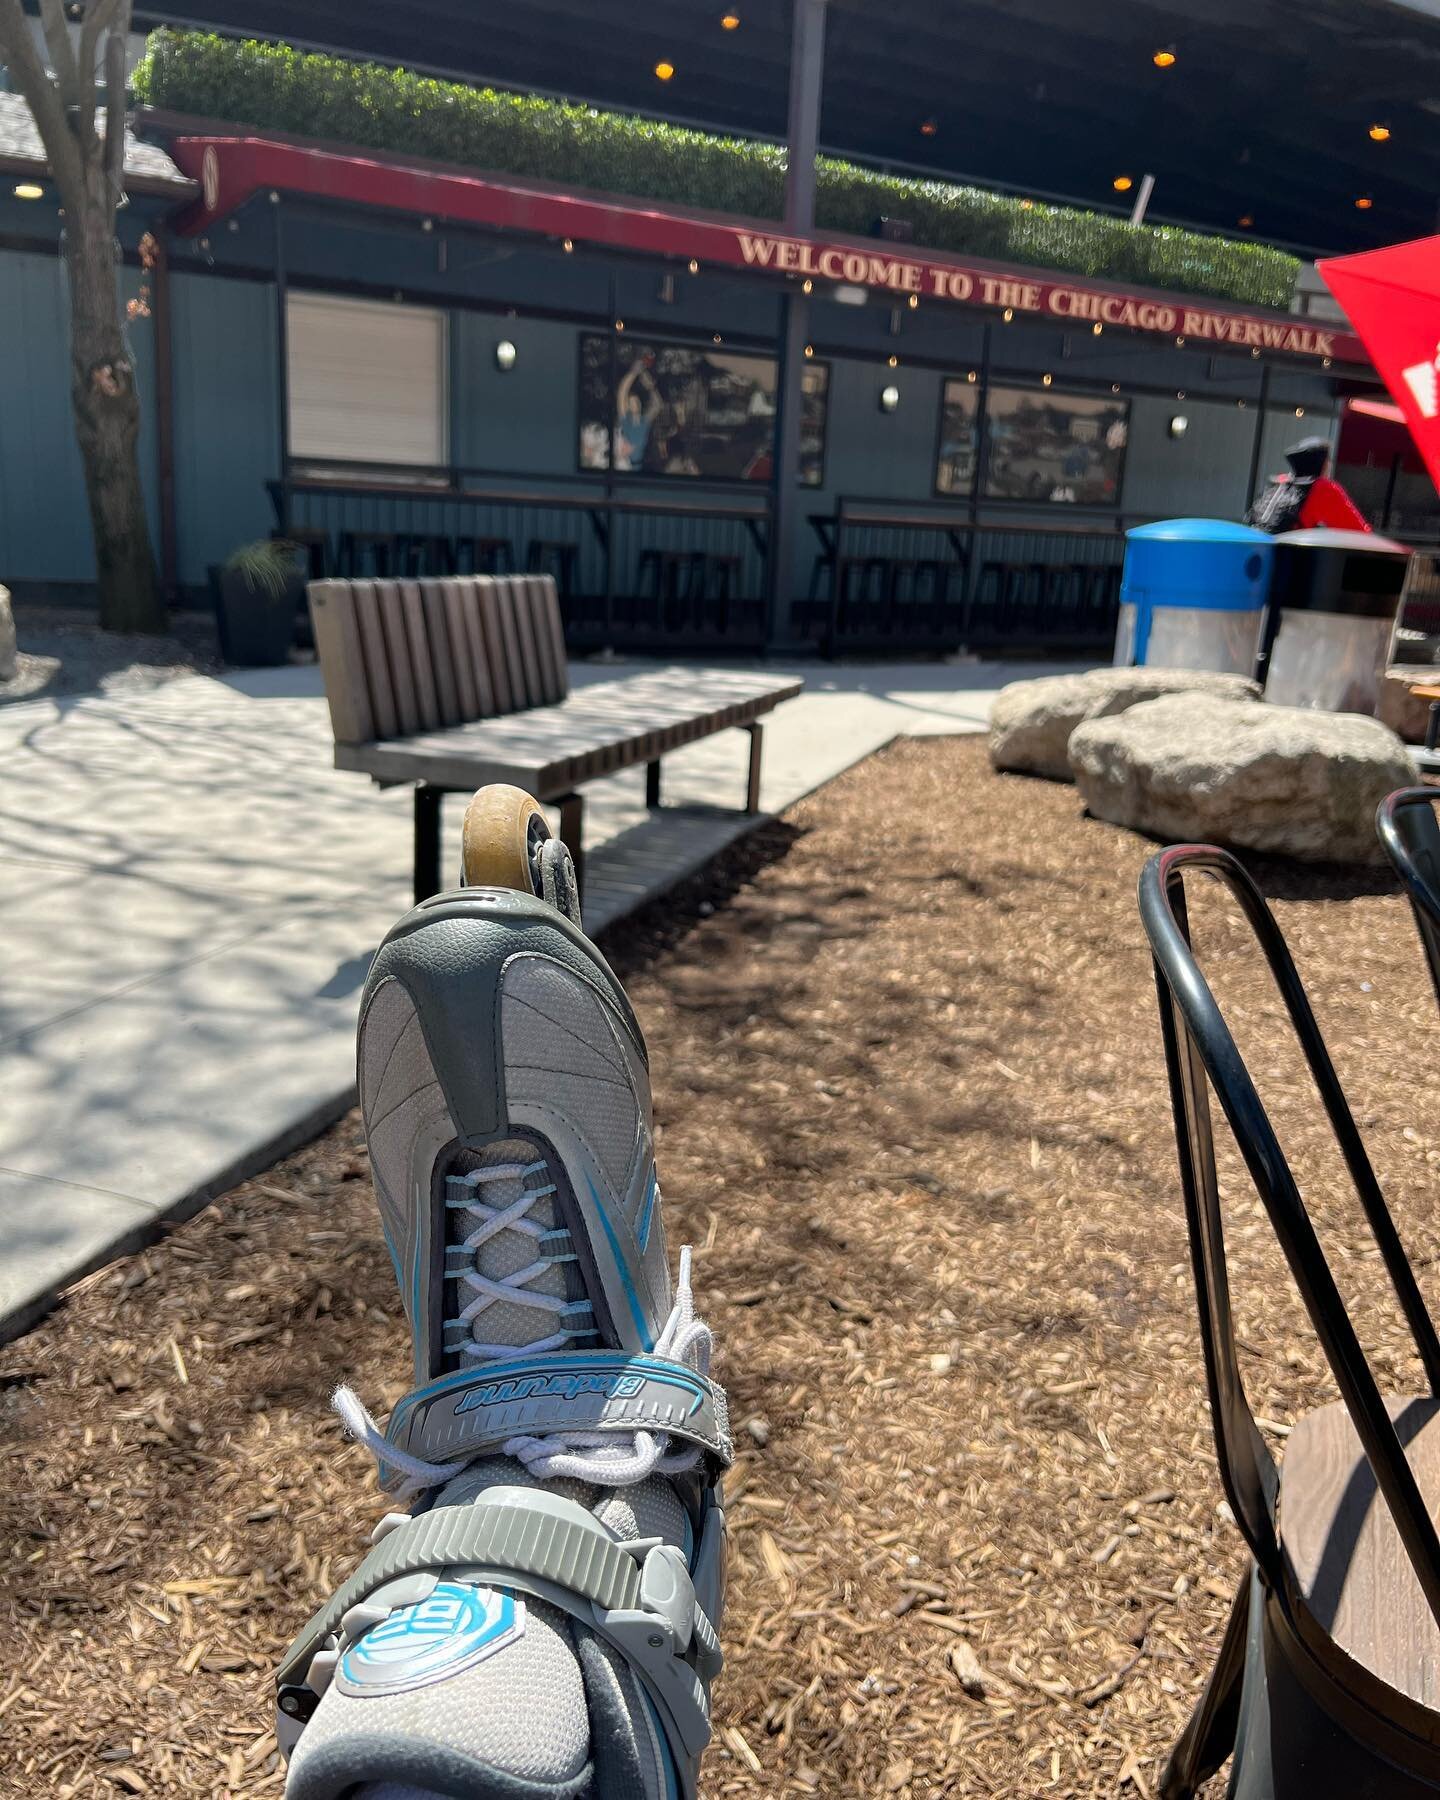 Suns 🌞out, skates out!! River walk! Let me know how you are able to enjoy this sunshine today!
Consistently Supporting you in your movements 💪❤️
*
*
*
*
#flexwellnesschicago #cityskating #chicago #chicagoriverwalk #citybythelake #sofortunate